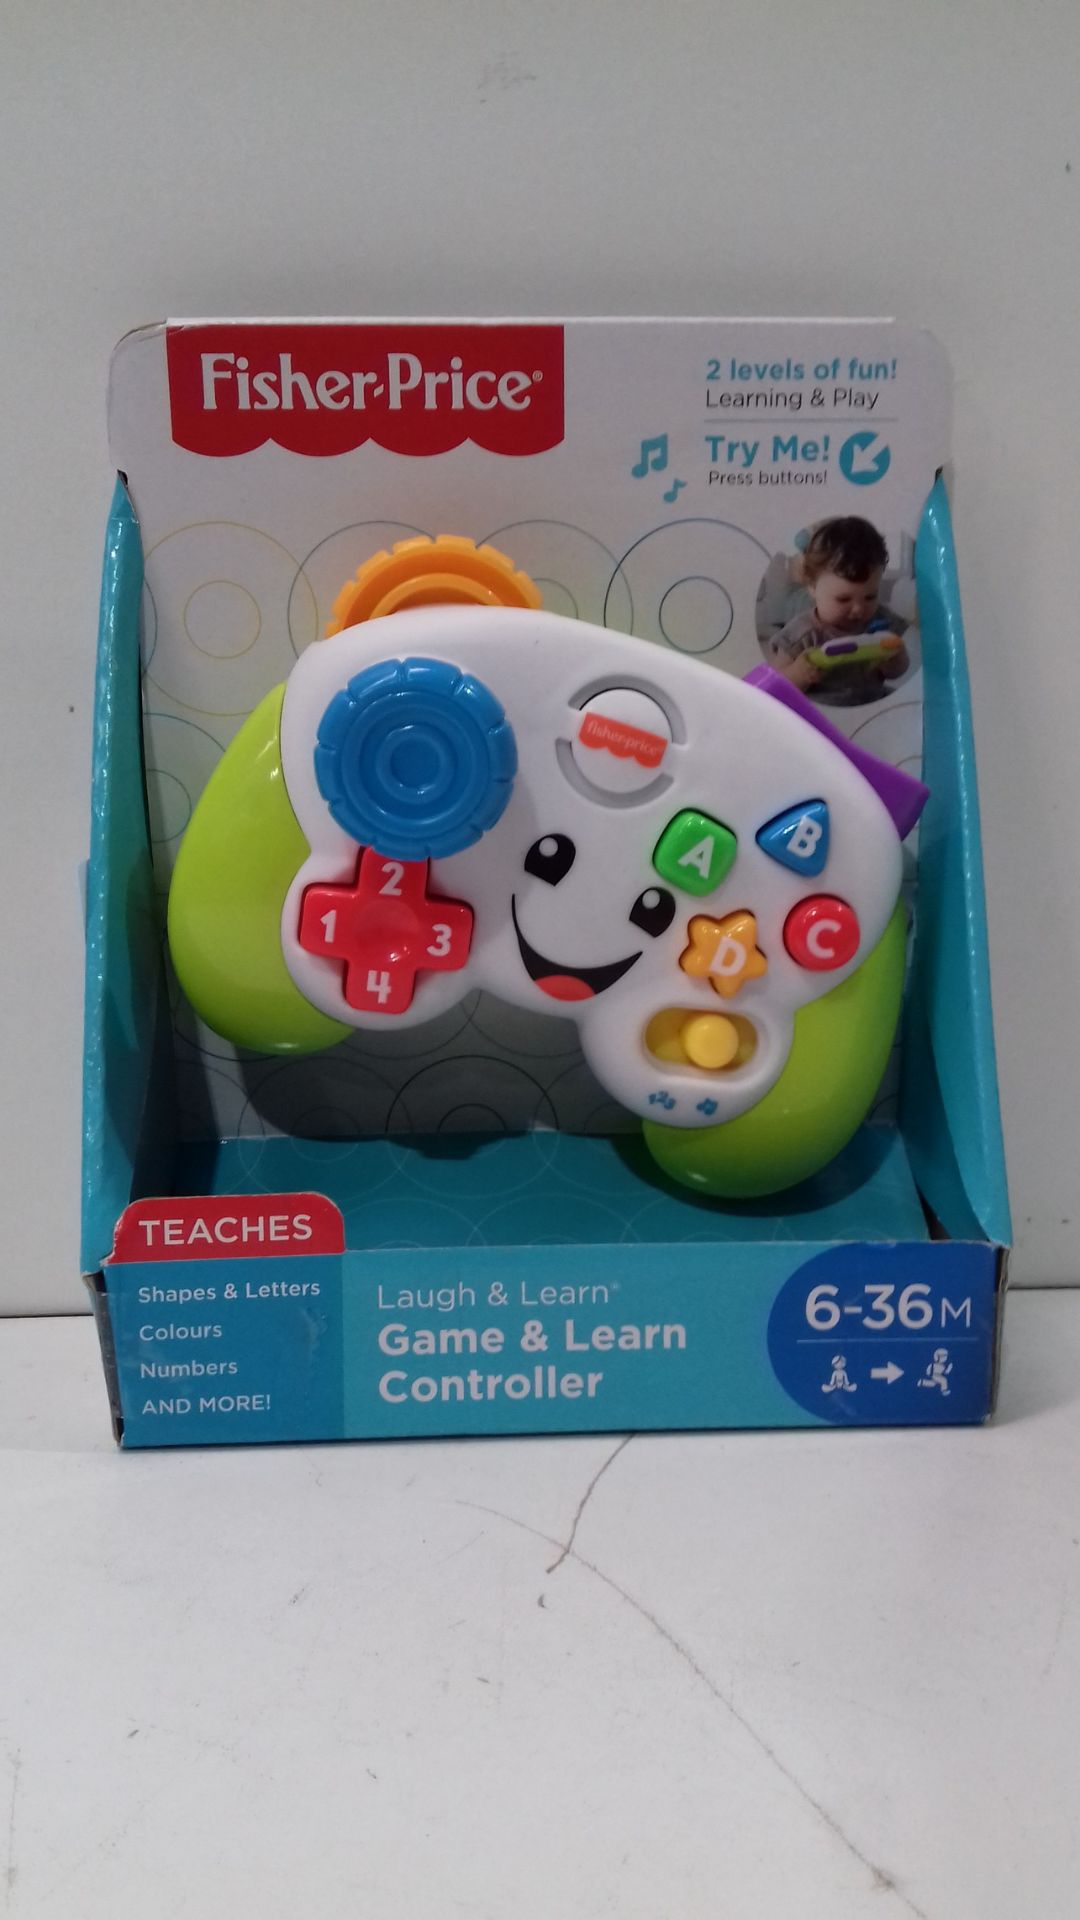 RRP £17.28 Fisher-Price FWG13 Musical Gamepad and Learning Joystick - Image 2 of 2